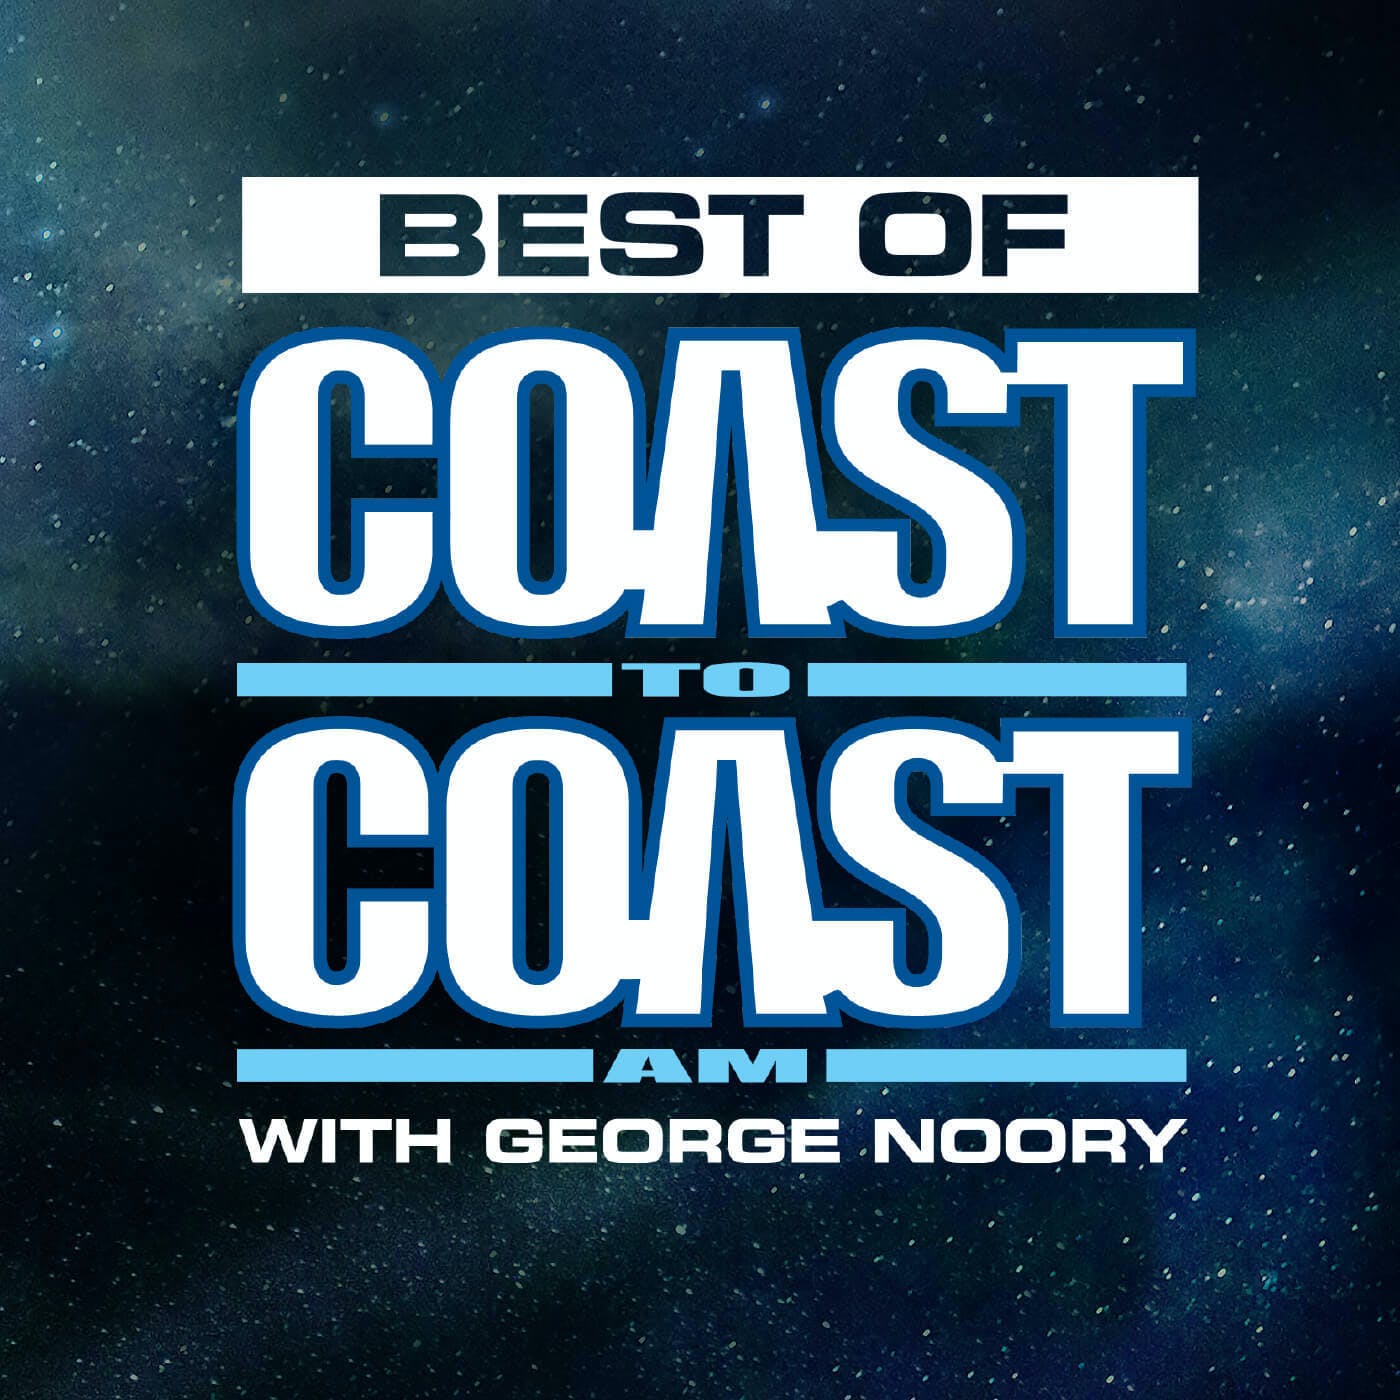 Design of the Universe - Best of Coast to Coast AM - 11/13/19